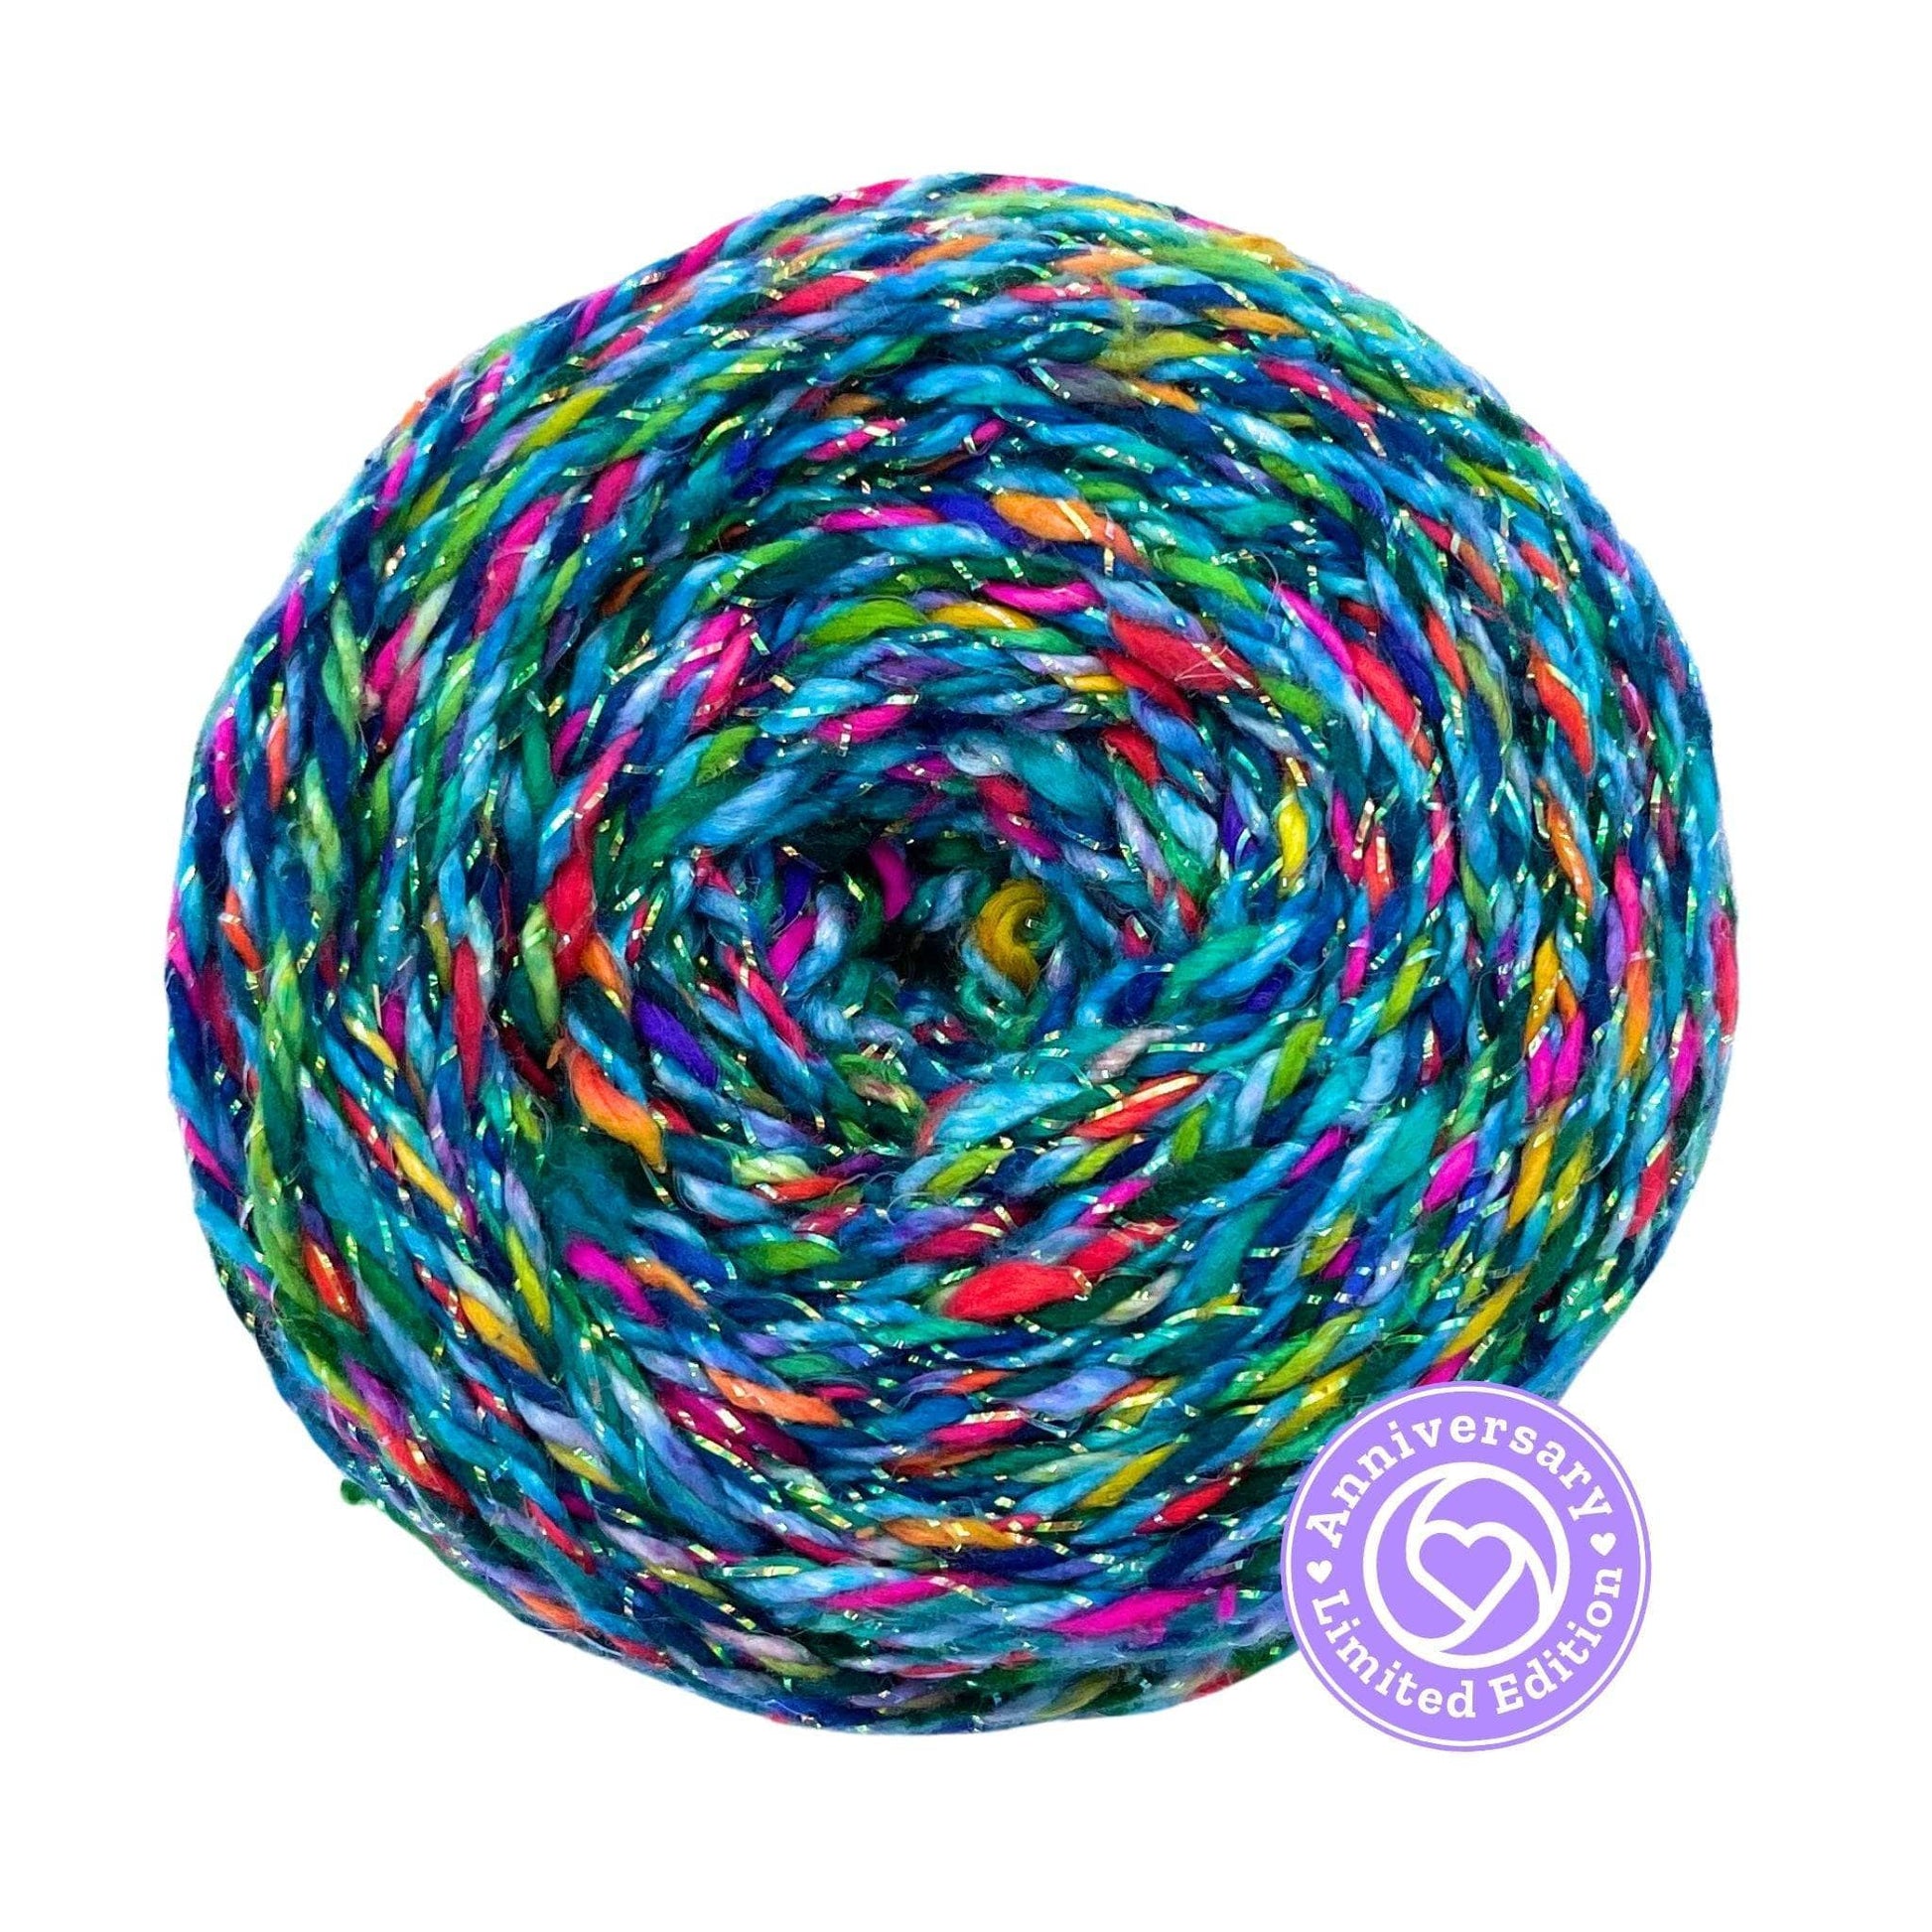 A Skein of Limited Edition Sparkle DK Weight Triple Twist Yarn in the colorway 'Fairy Lights' on a white background. This is a limited edition skein for Darn Good Yarns Birthday.